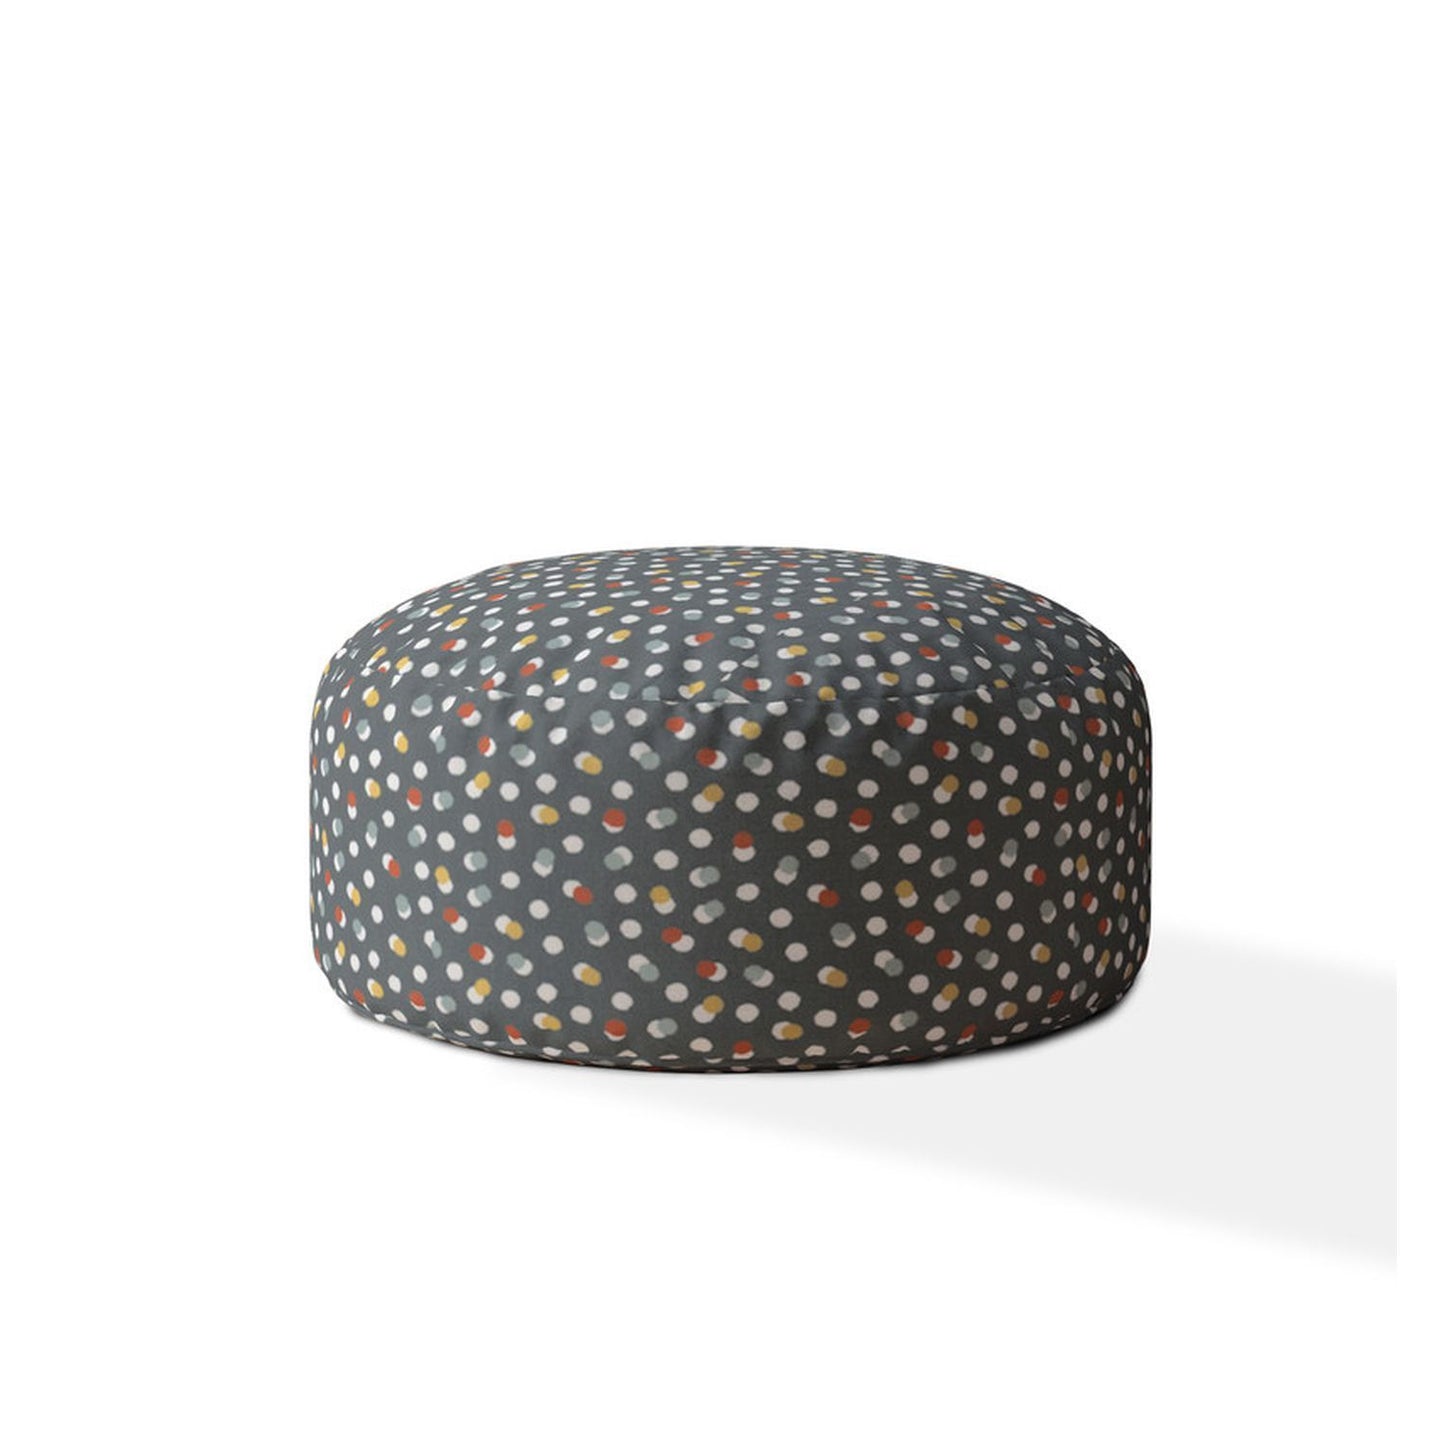 Indoor DANCING DOTS Greyish Blue Round Zipper Pouf - Cover Only - 24in dia x 20in tall